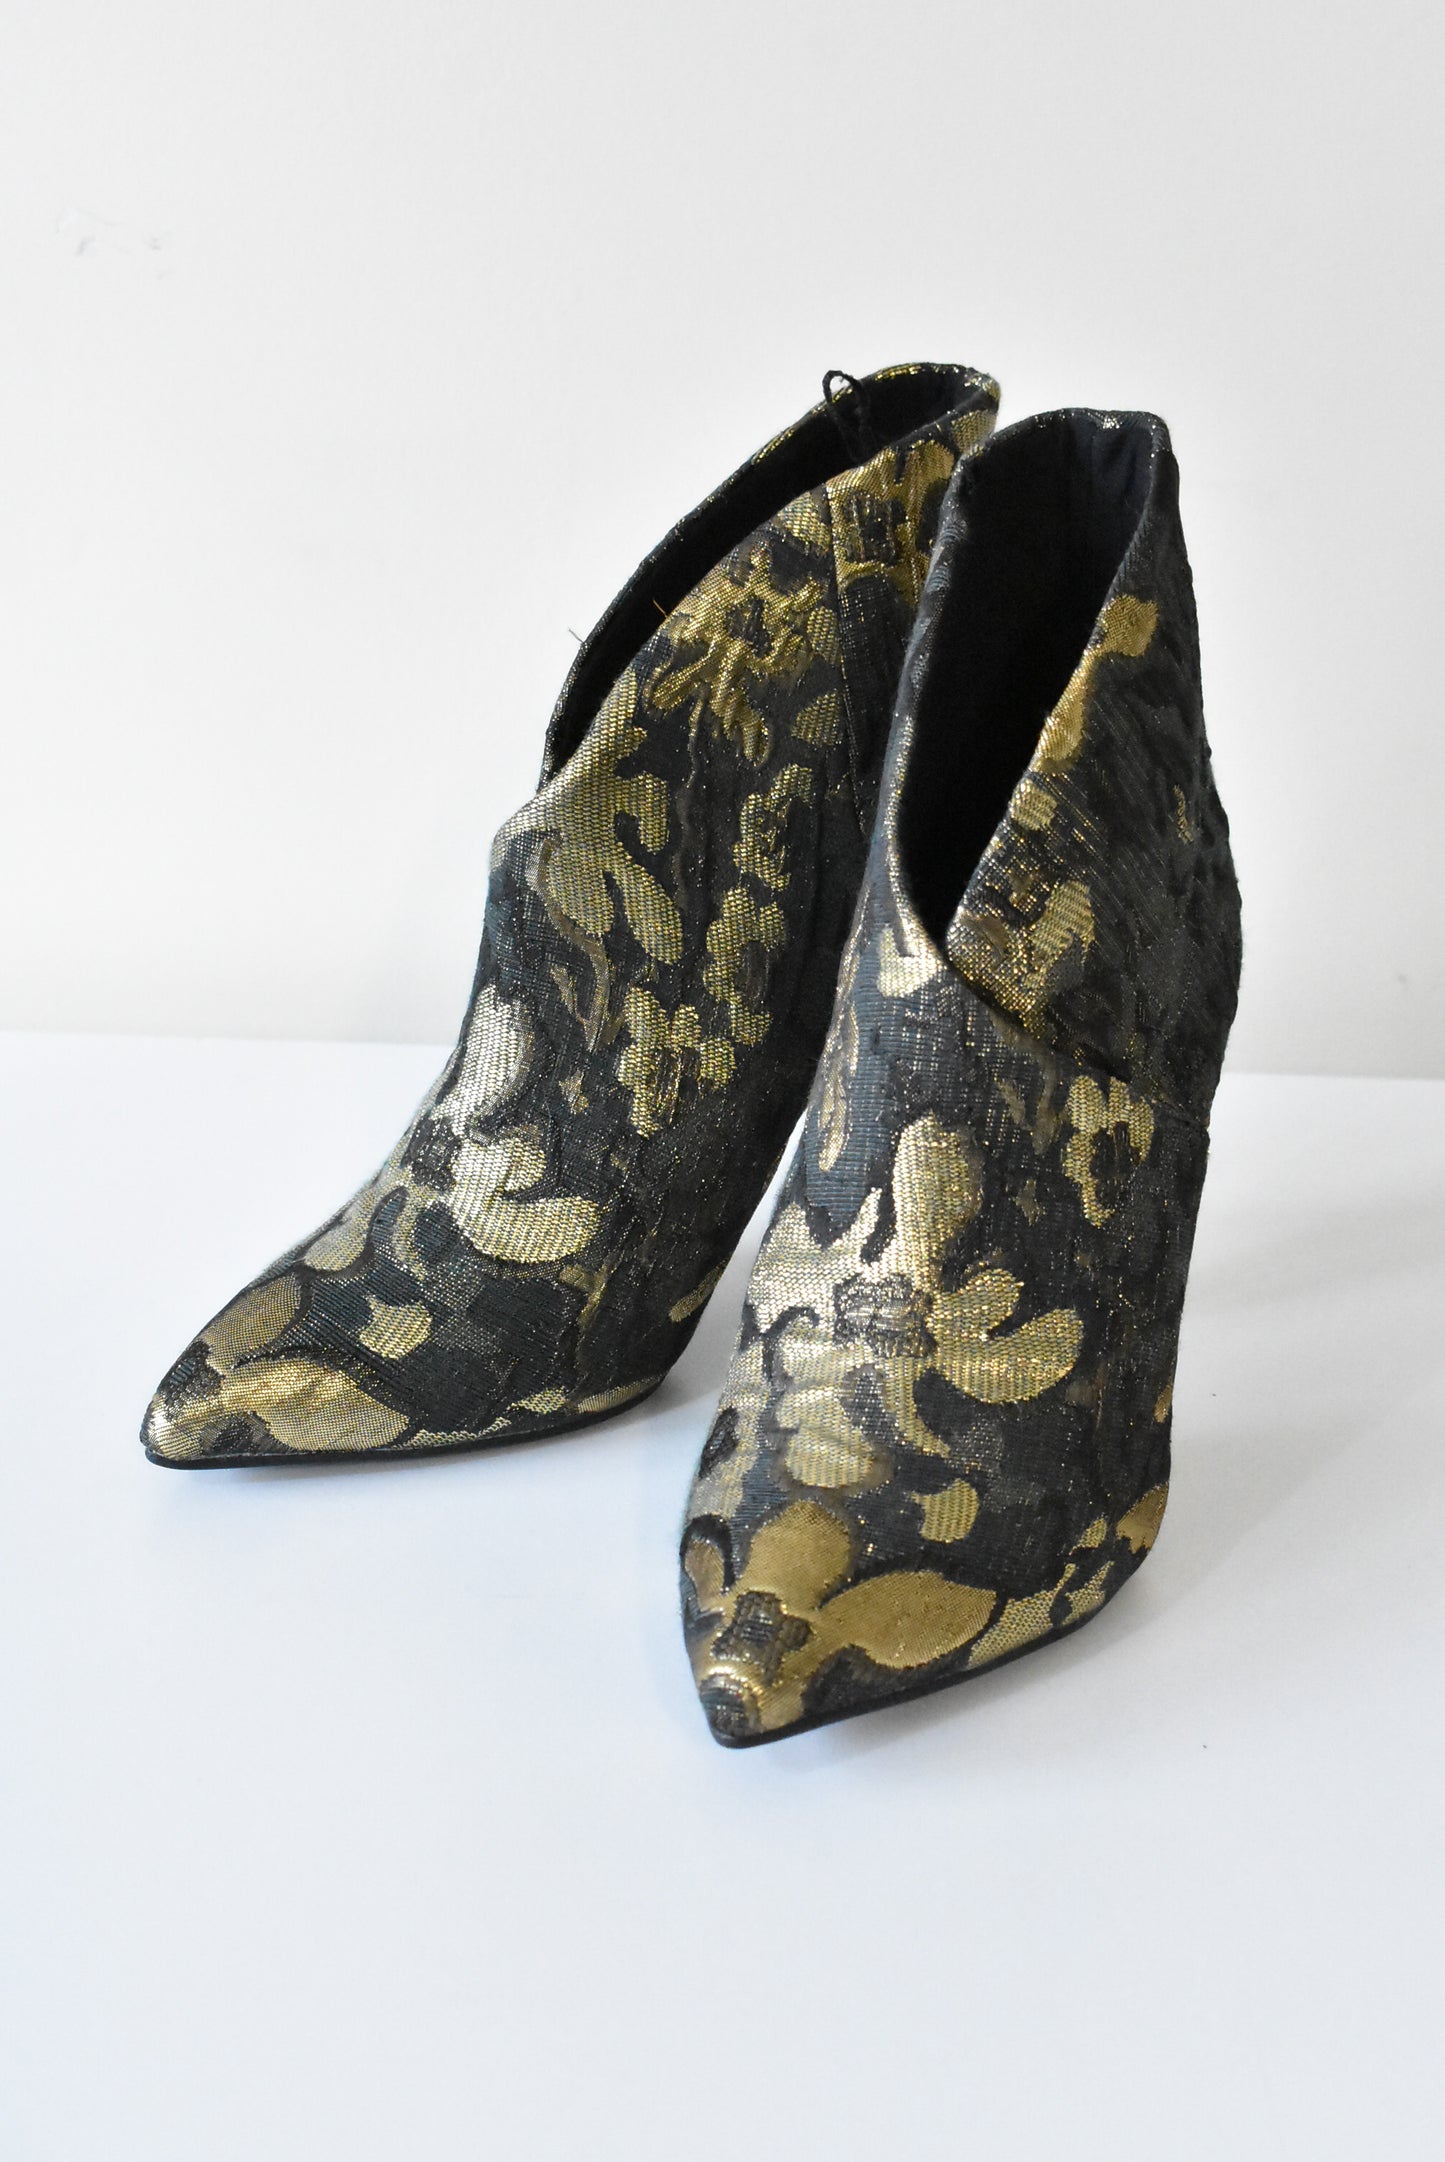 M&S gold sparkle brocade boots, size UK 5